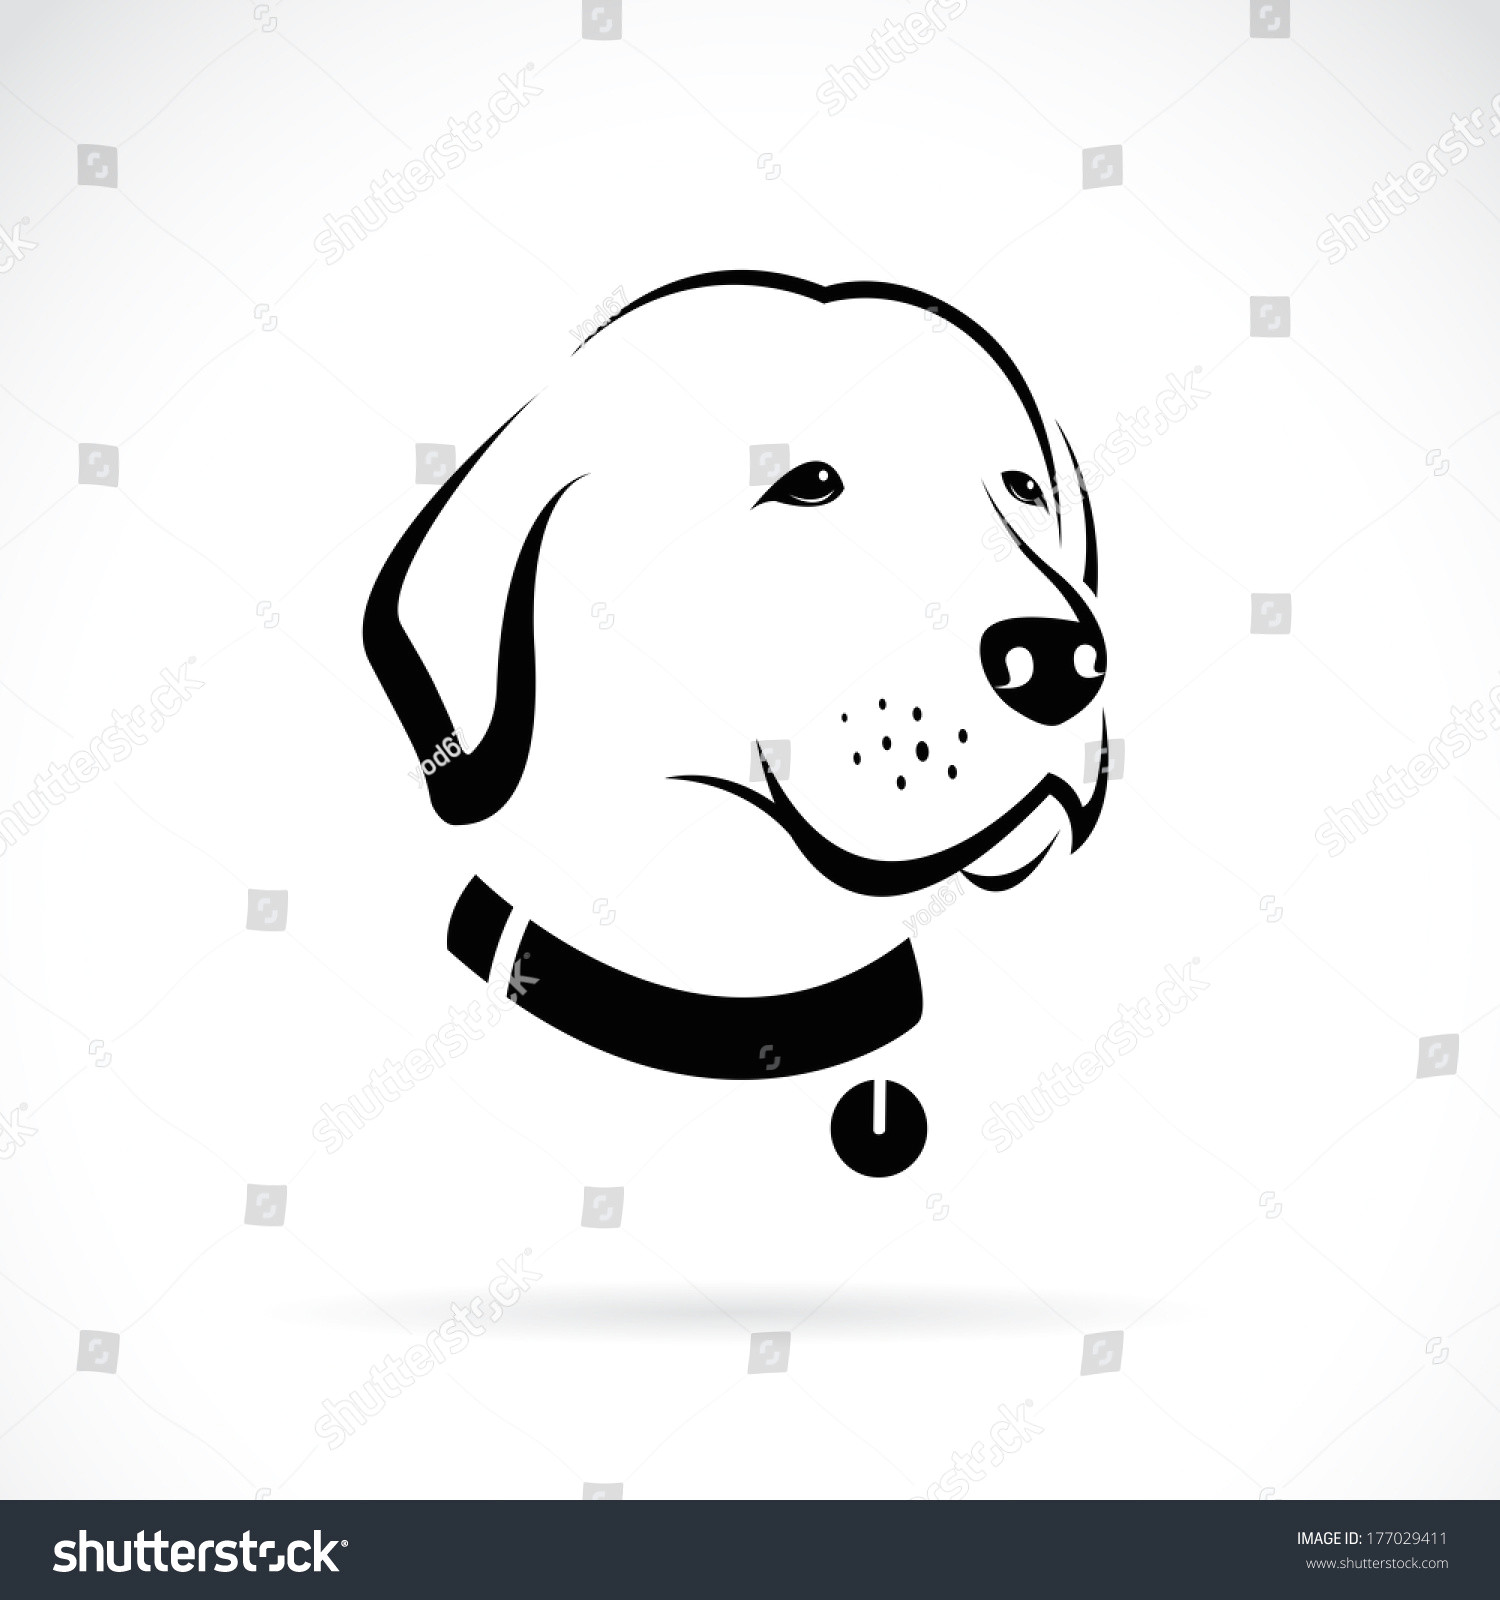 Line Drawing Of A Dog Head Vector Image Labrador Dogs Head On Stock Vector Royalty Free